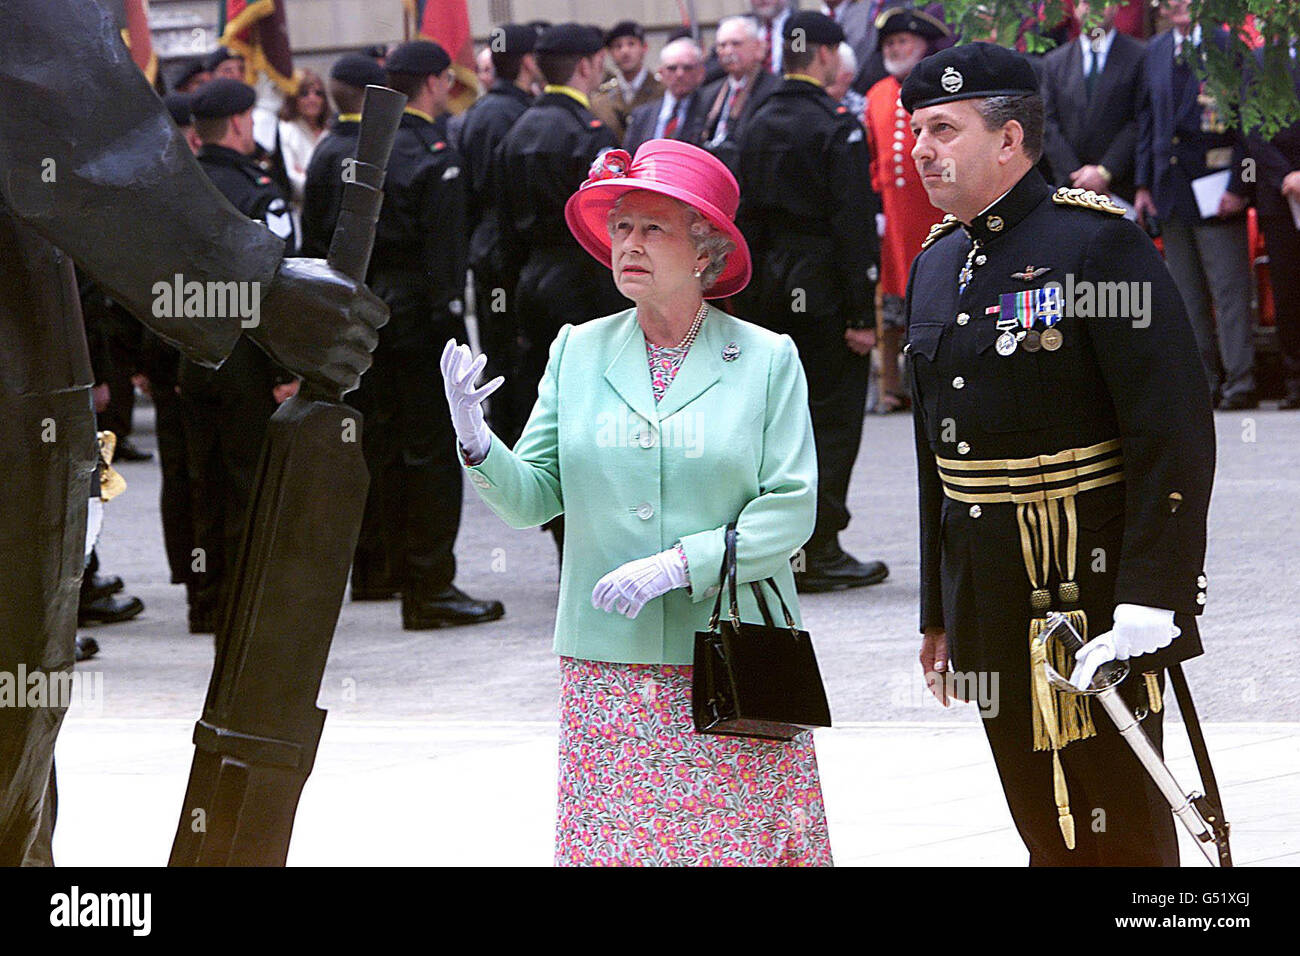 Queen Elizabeth II admires a bronze statue of a five man tank crew, which she unveiled in Whitehall Place, London. The memorial statue is dedicated to the men of the Royal Tank regiment, which was formed 100 years ago on 13/06/2000. * The Quuen was escorted from Buckingham Palace to the statue by a 1924 Rolls-Royce armoured car. Stock Photo